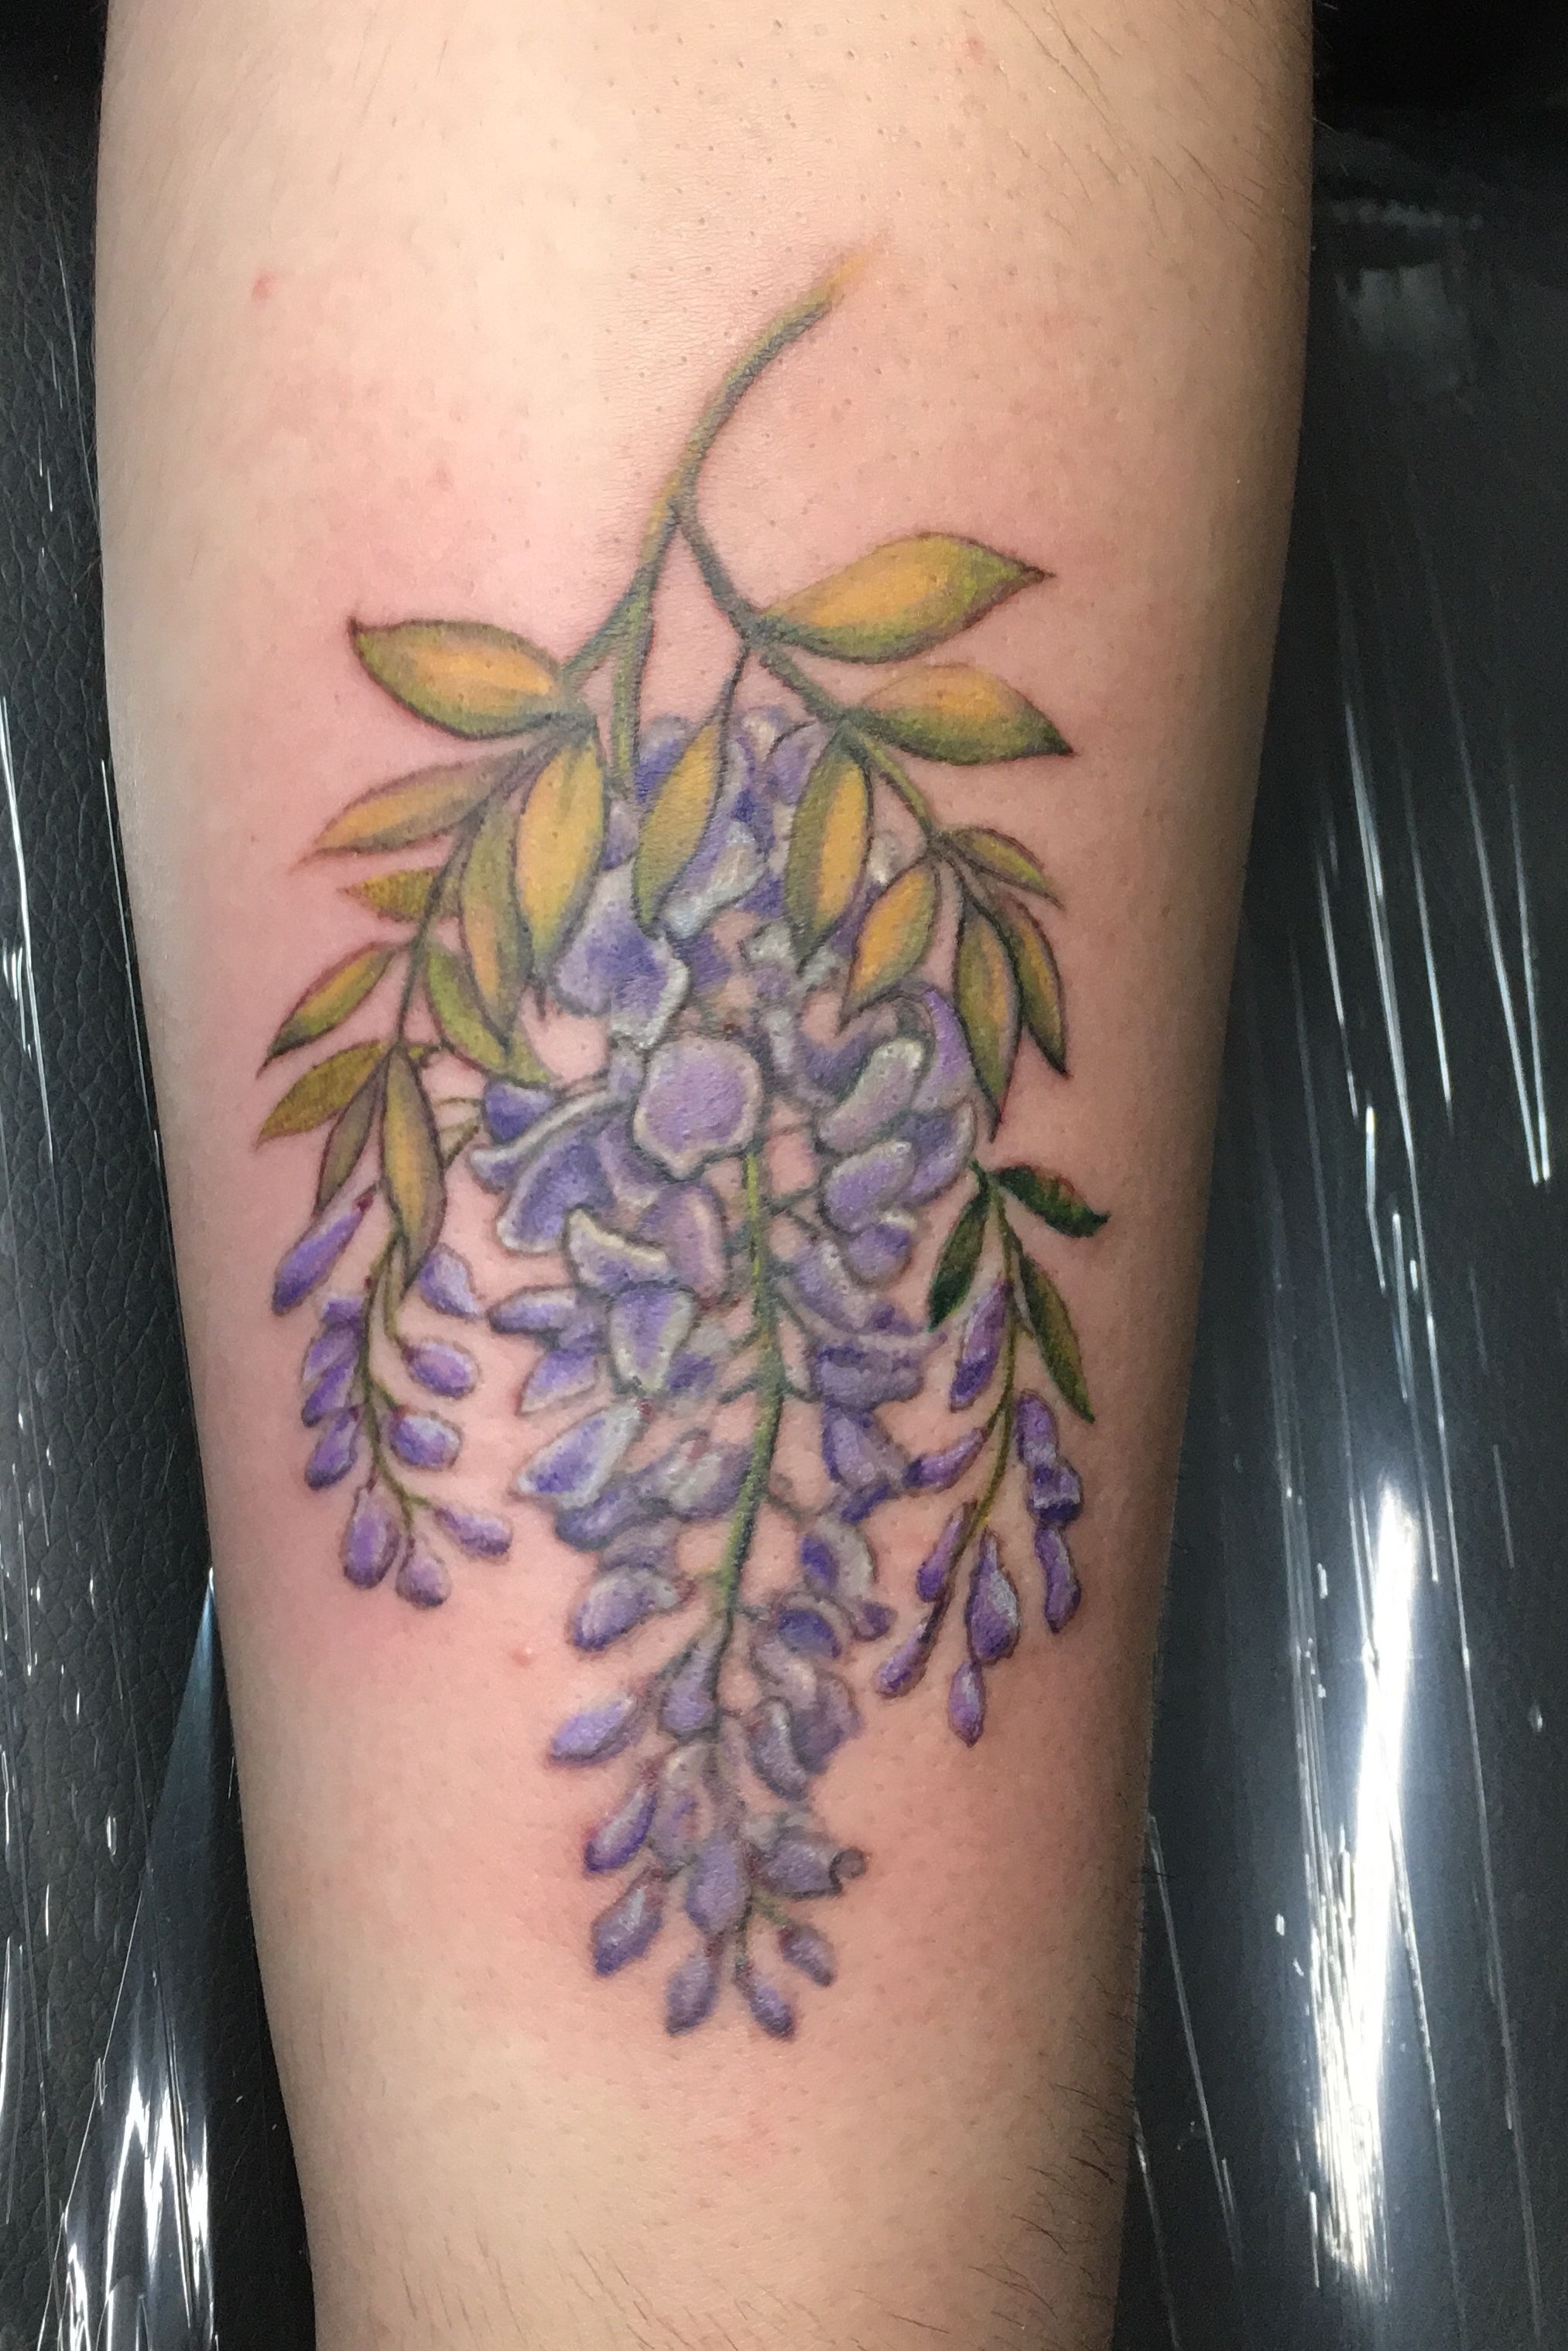 Pis Saro on Instagram DONT MISS wisteria blooming Meet wisteria  wearing temporary tattoos fro  Friend tattoos Floral tattoo sleeve  Beach inspired tattoos